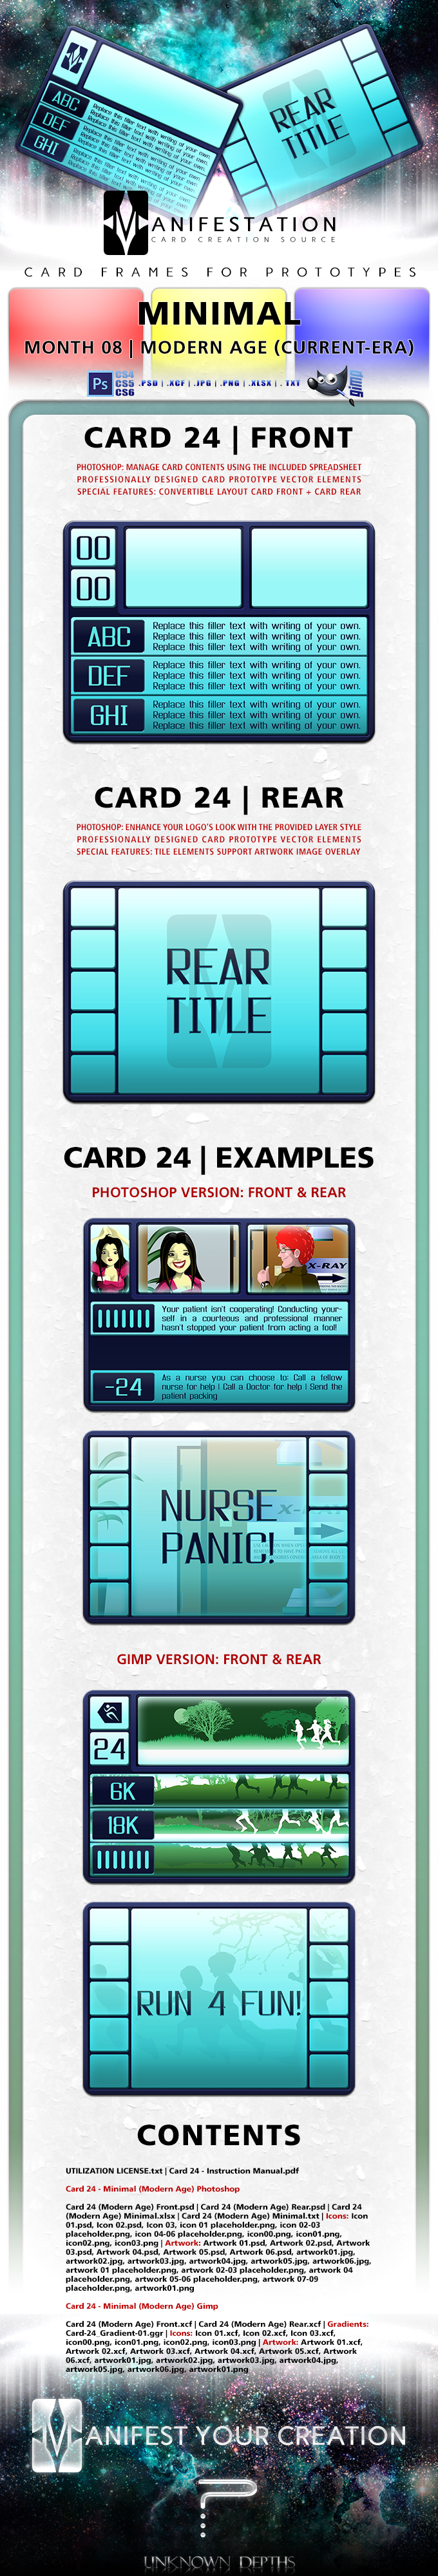 Card 24 Informational Graphic